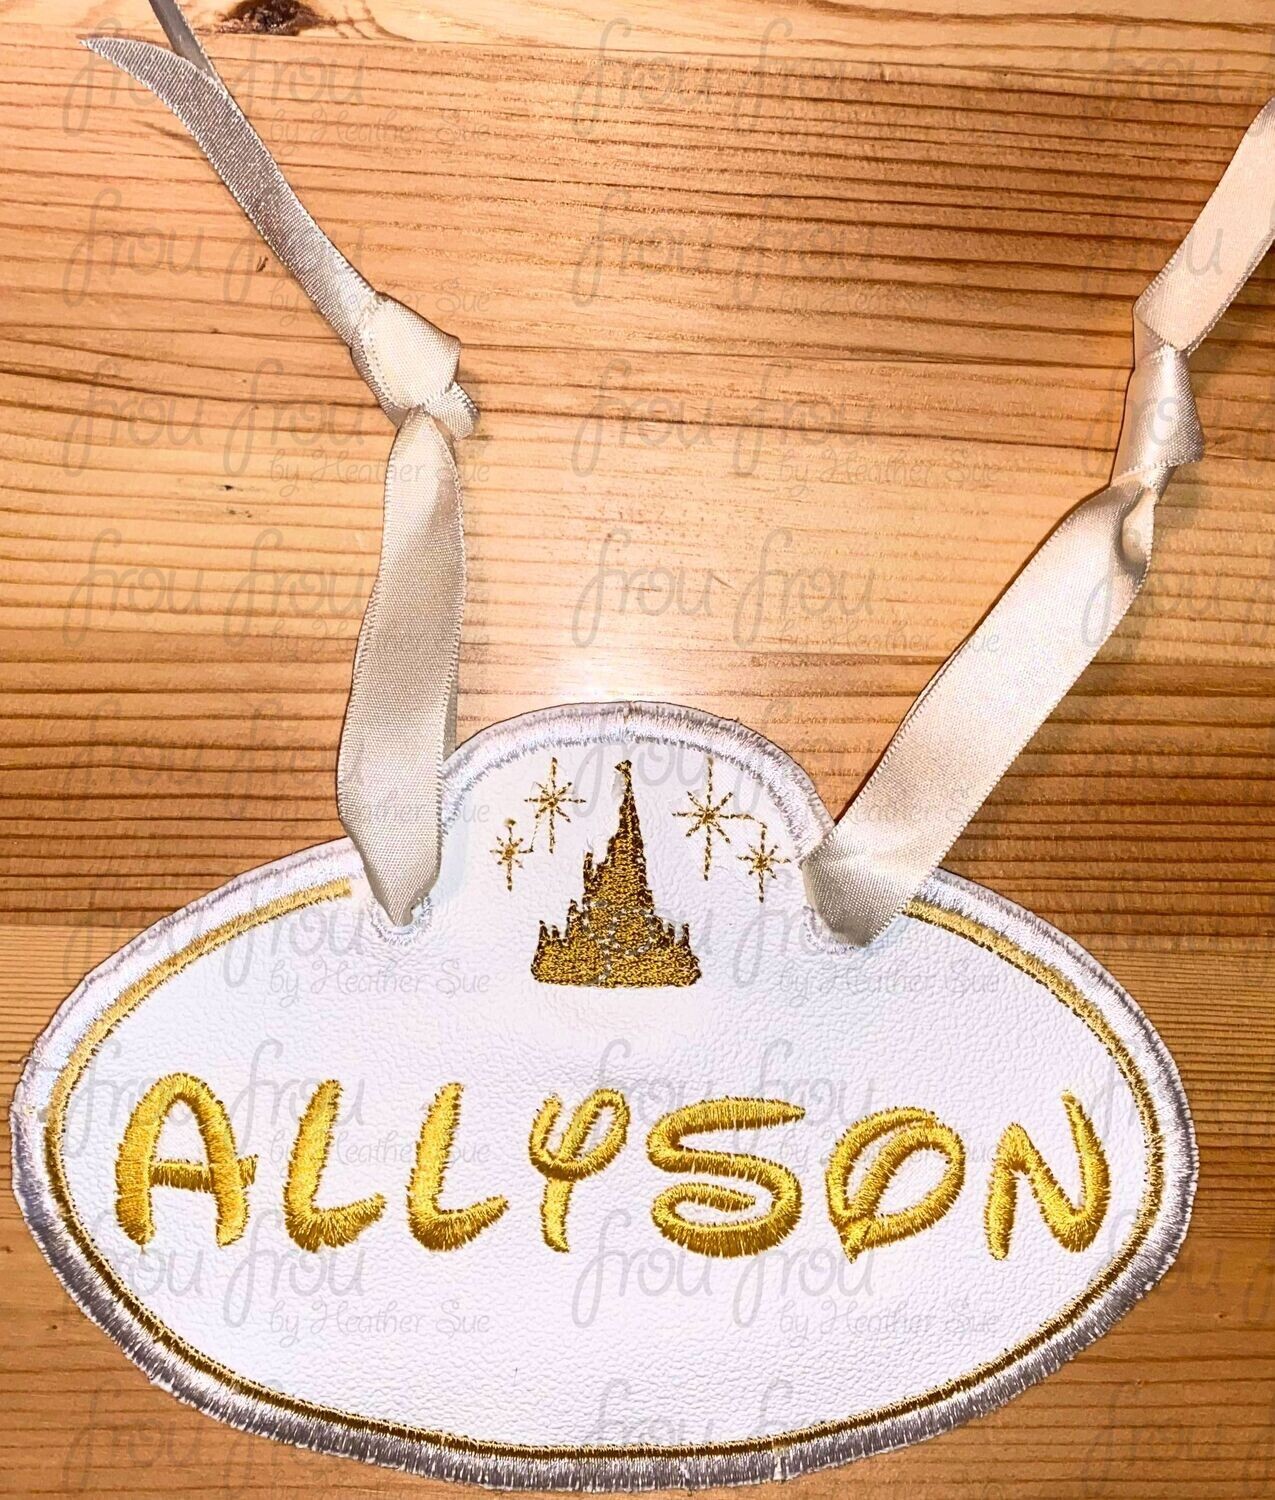 Stroller Name Tag WDW 50th Anniversary Fish Extender IN THE HOOP Machine Applique Embroidery Design 2"-16"